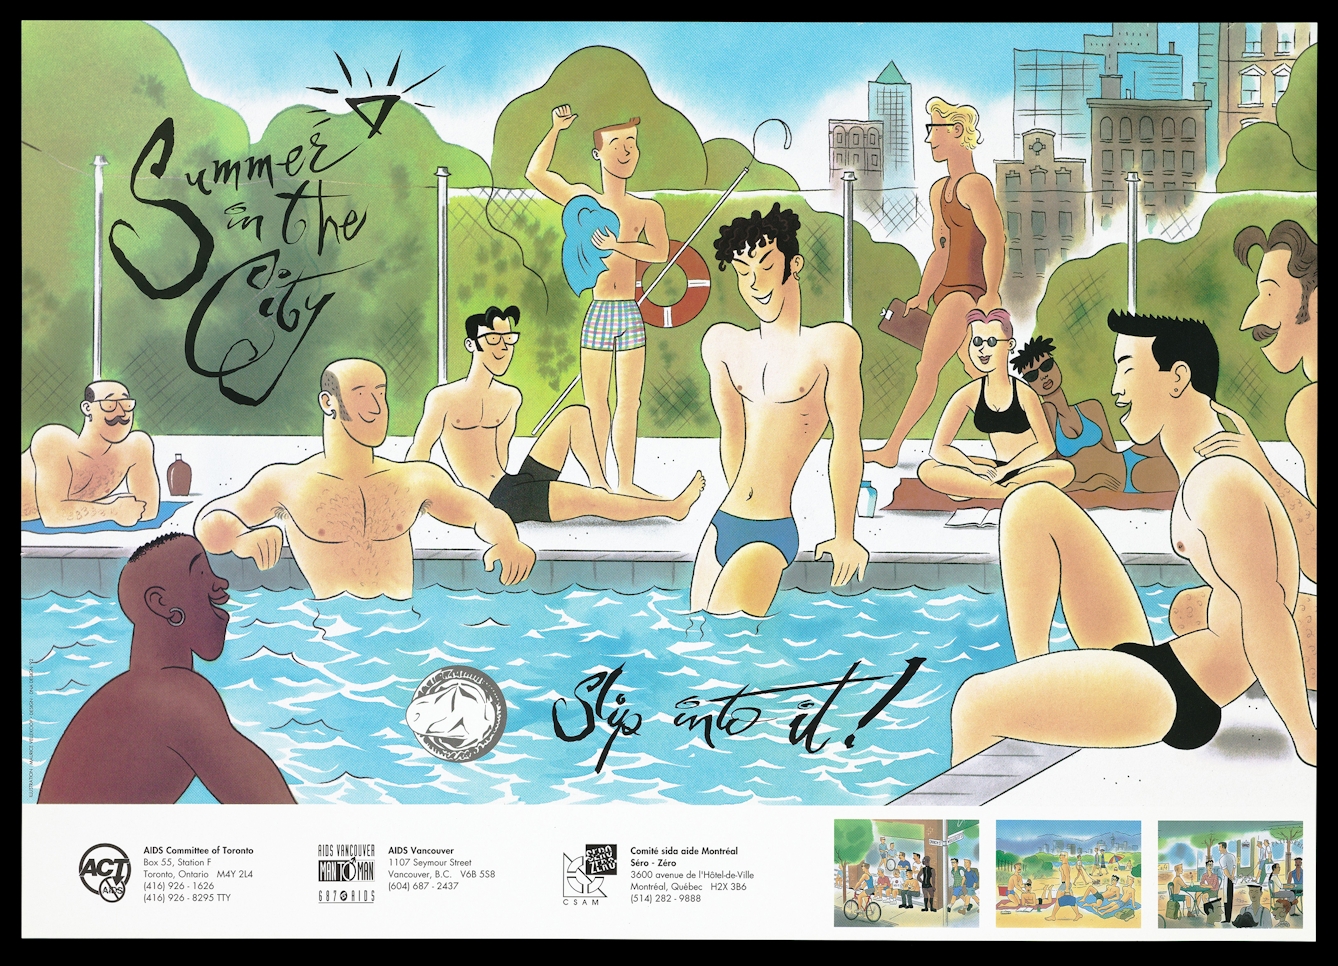 A group of young people relax around an open air swimming pool in an urban environment. At the top left of the poster are the words "Summer in the City" and at teh bottom is a picture of a round folded condom next to the words "Slip into it!"